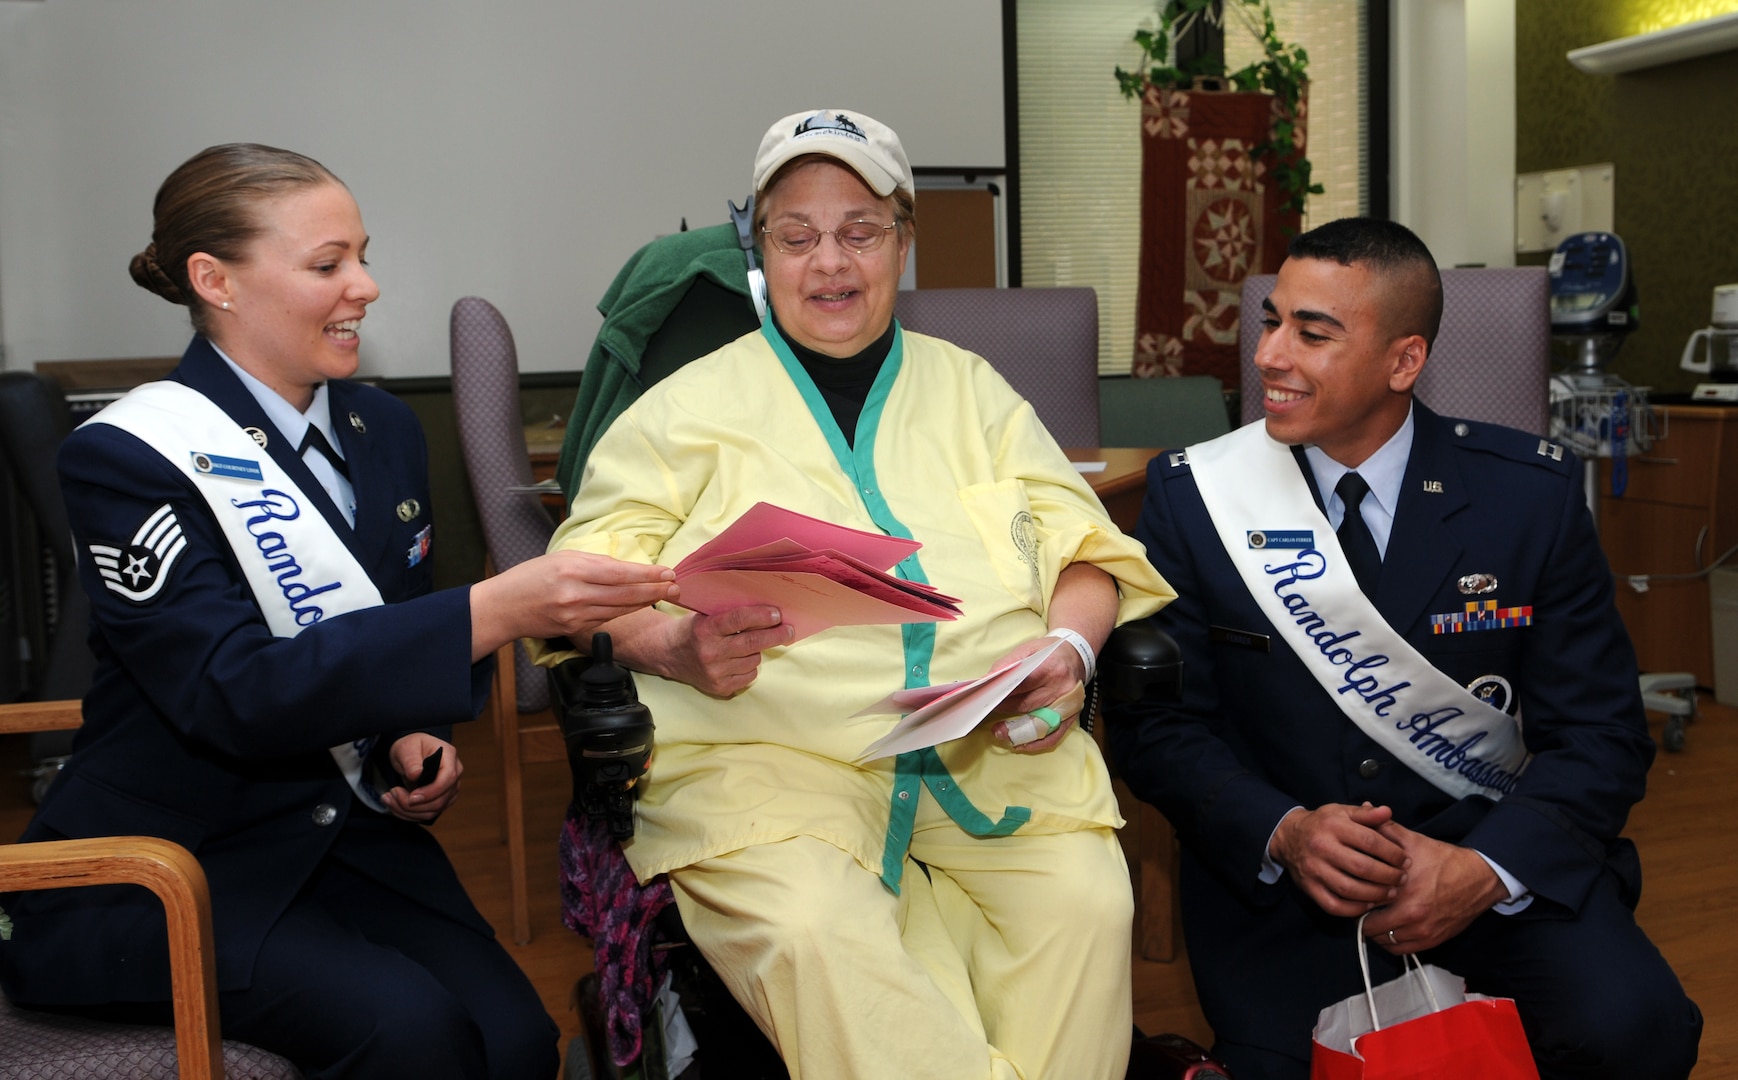 Capt. Carlos Ferrer, 341st Recruiting Squadron, and Staff Sgt. Courtney Linde, 12th Contracting Squadron, both Randolph Ambassadors, deliver hand-made Valentine's Day cards to Pat Webber, a veteran's wife, at Audie L. Murphy Memorial Veterans Hospital on Feb. 13 as part of the annual National Salute to Hospitalized Veterans Program. Col. Jacqueline Van Ovost, 12th FTW commander, and Chief Master Sgt. Max Grindstaff, 12th FTW command chief master sergeant joined the ambassadors in wishing good health to fellow veterans and thanking them for their service. (U.S. Air Force photo by Don Lindsey)